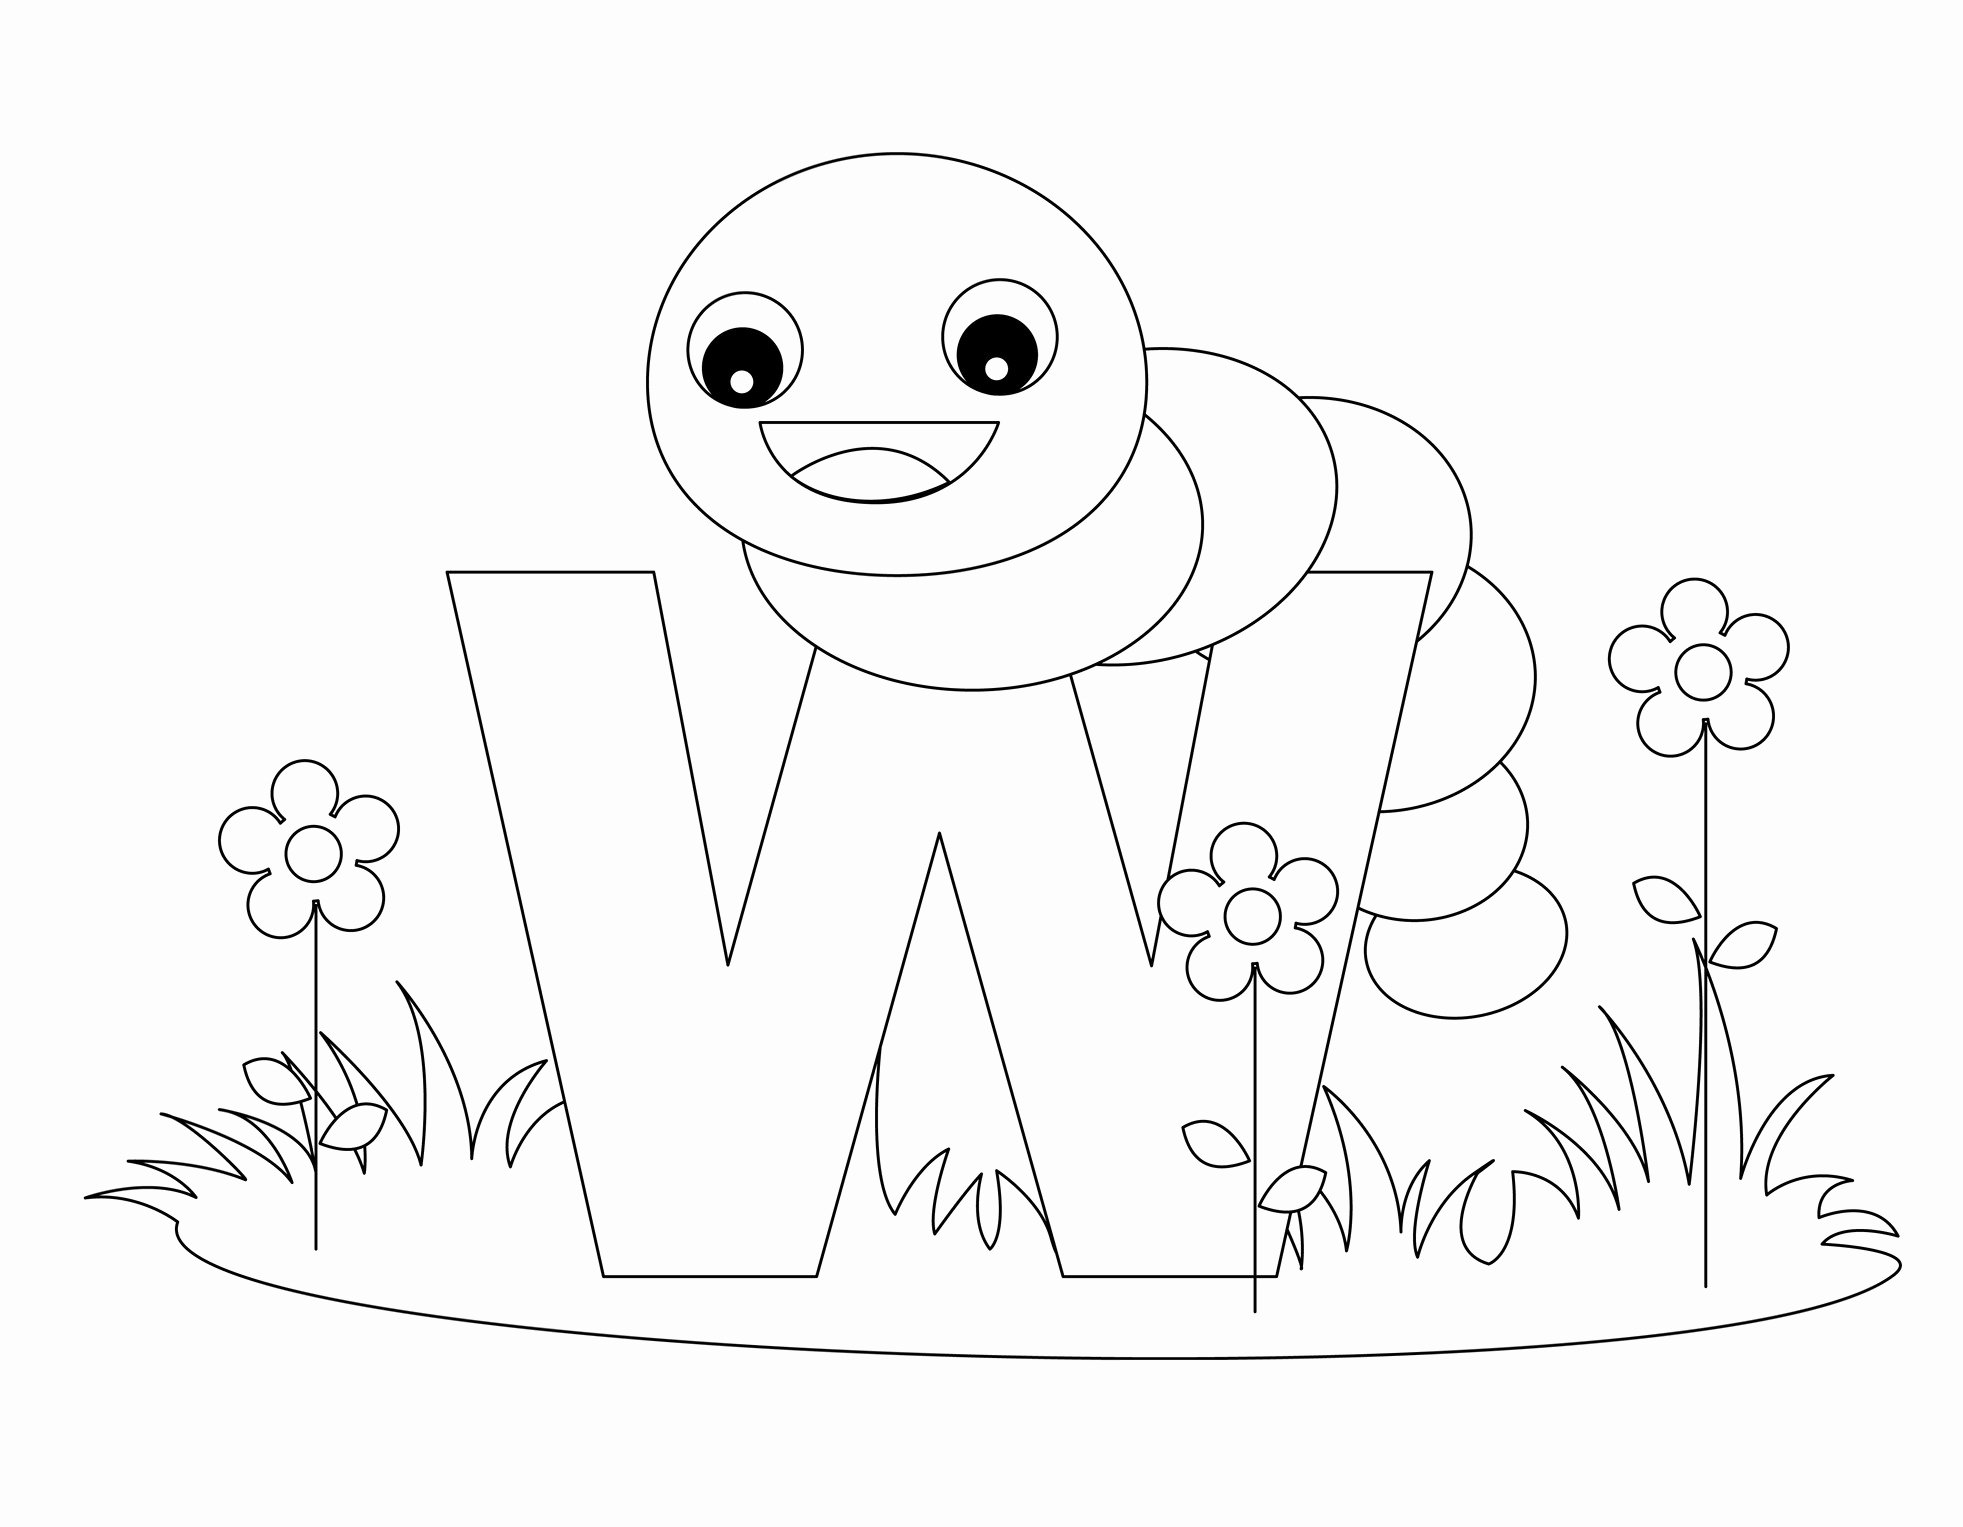 Printable Alphabet Letters Free Awesome Free Printable Alphabet Coloring Pages for Kids Best